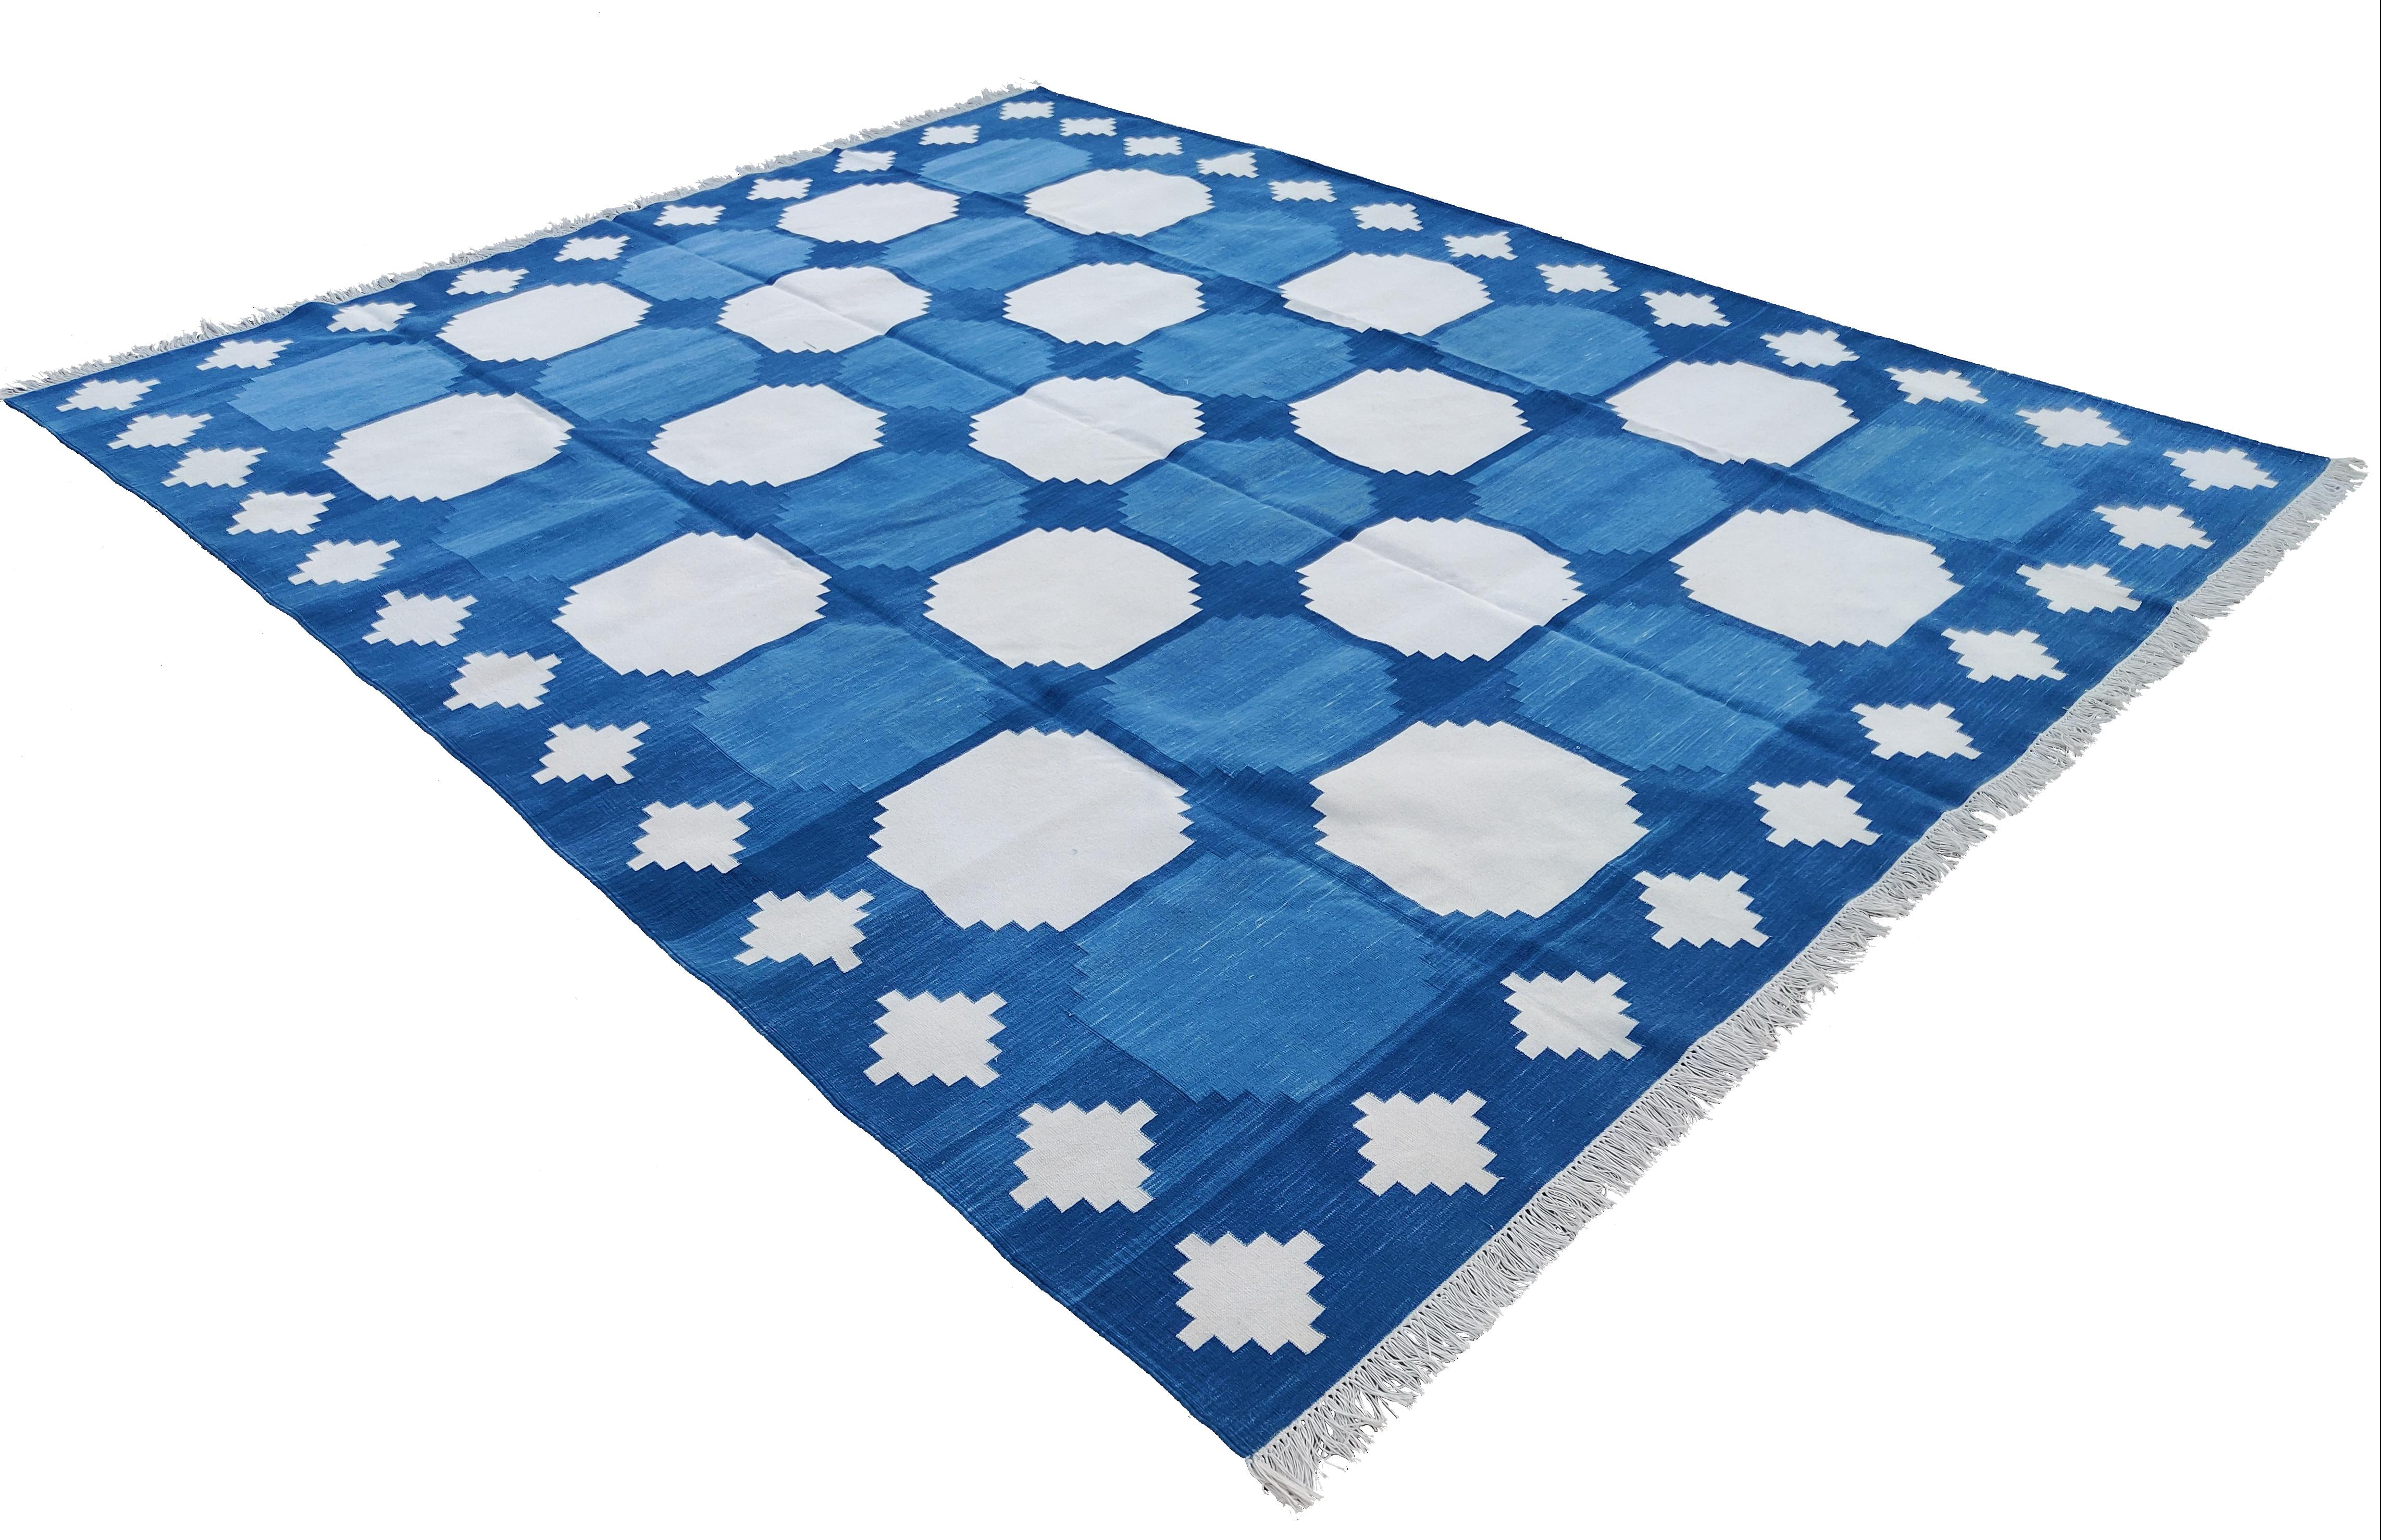 Cotton Vegetable Dyed Reversible Sky Blue And White Geometric Patterned Tile Indian Rug - 8'x10'
These special flat-weave dhurries are hand-woven with 15 ply 100% cotton yarn. Due to the special manufacturing techniques used to create our rugs, the